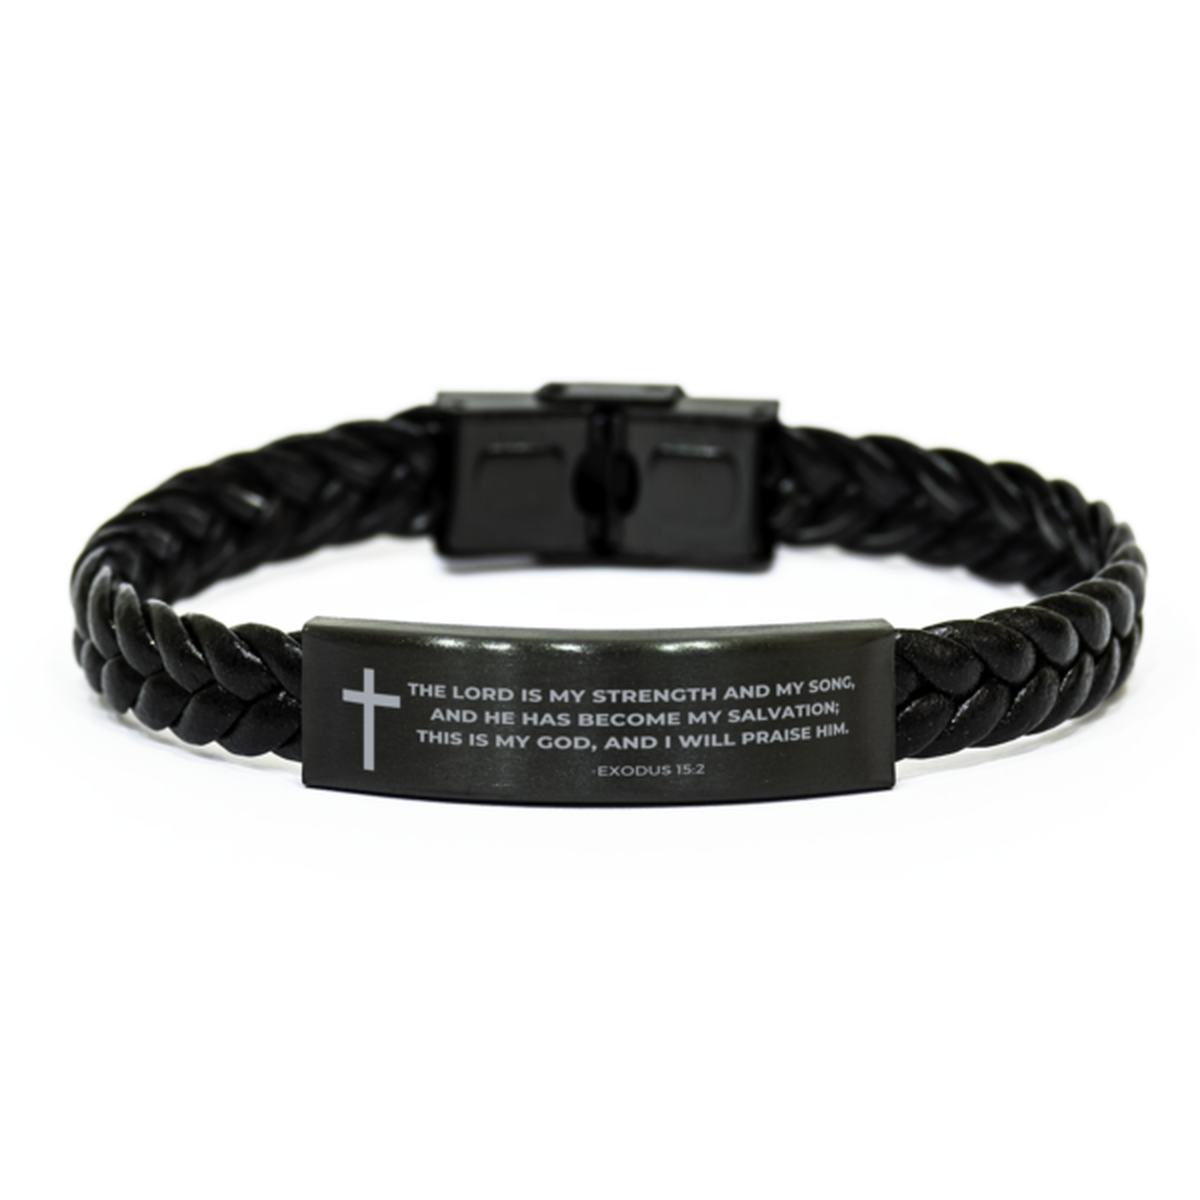 Baptism Gifts For Teenage Boys Girls, Christian Bible Verse Braided Leather Bracelet, The Lord is my strength, Catholic Confirmation Gifts for Son, Godson, Grandson, Nephew